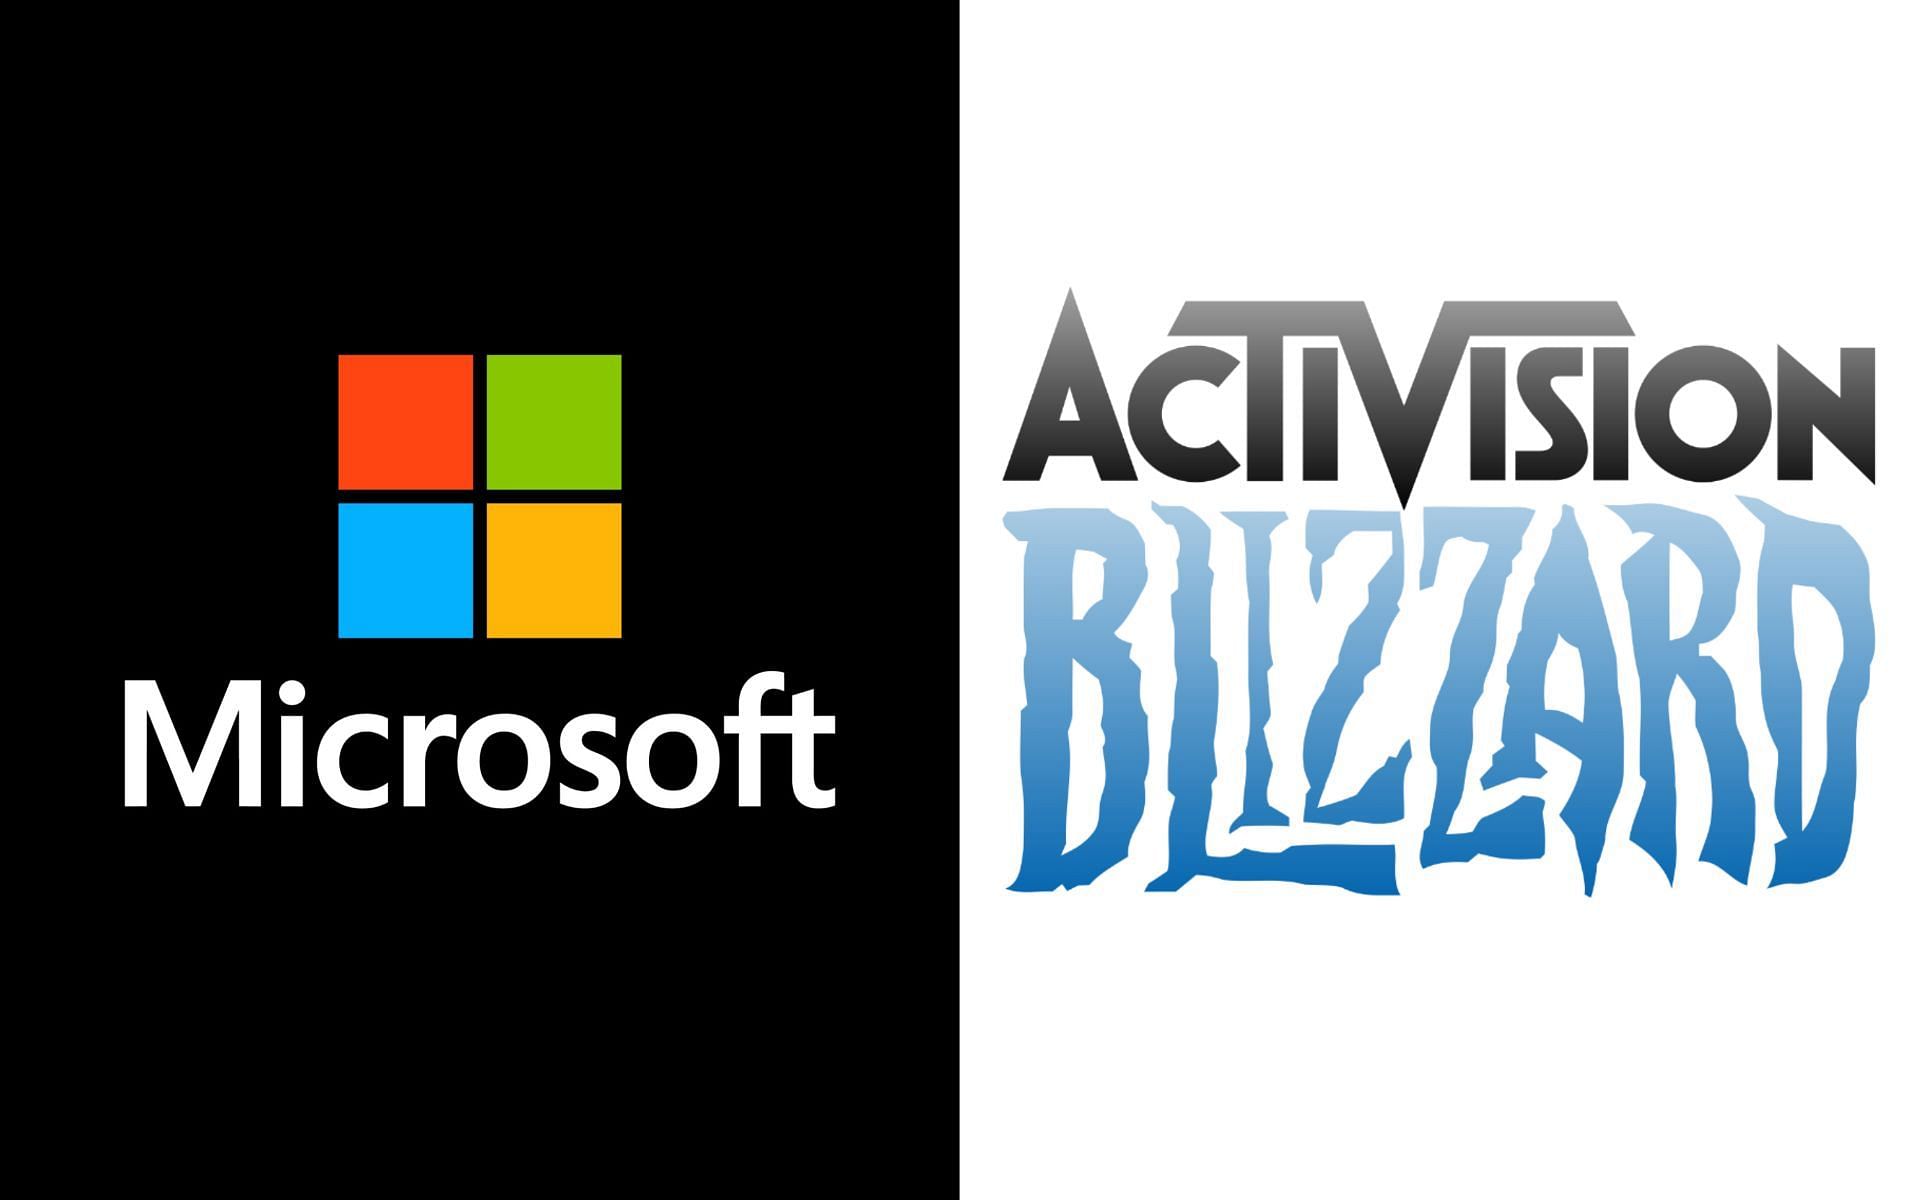 Microsoft announced the deal in January 2022 (Images via Microsoft and Activision Blizzard)